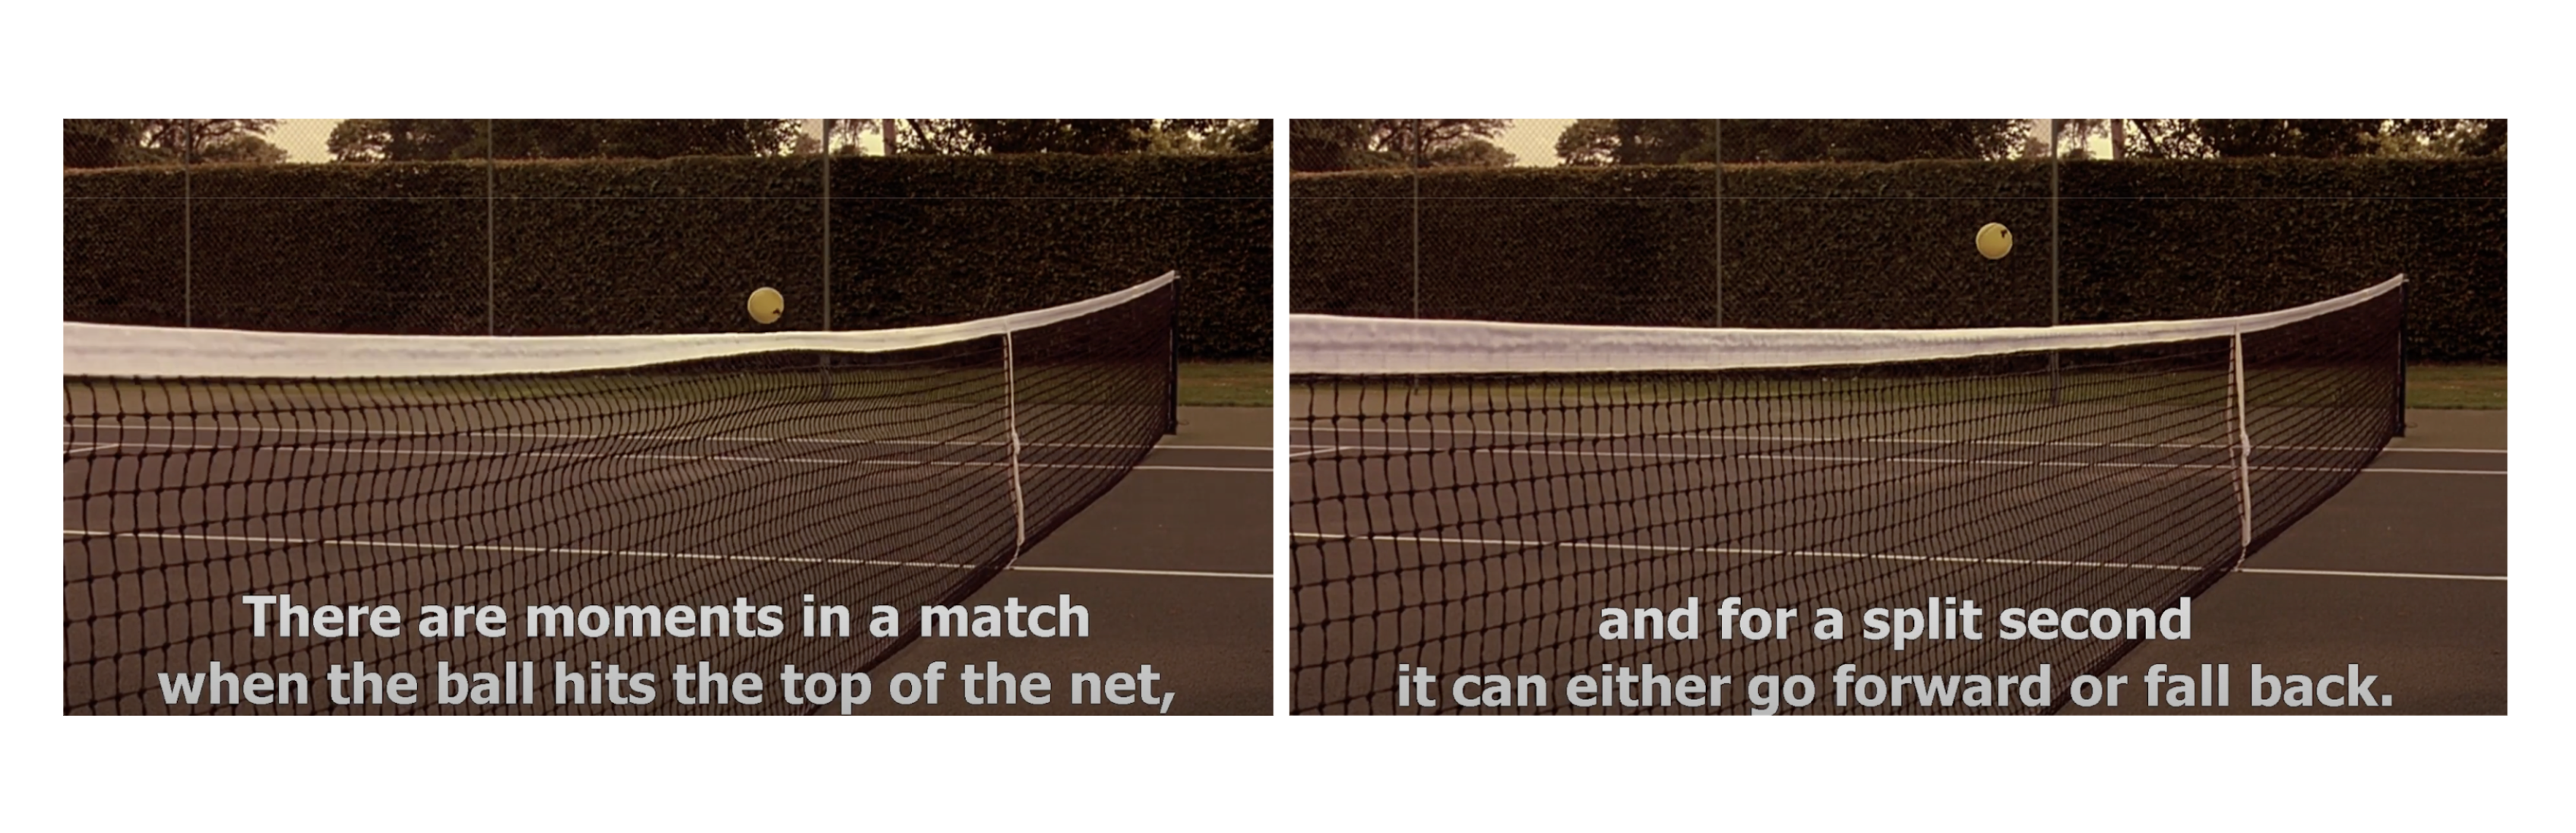 From Match Point (2005) film. &quot;There are moments in a match when the ball hits the top of the net, and for a split second it can either go forward or fall back.&quot;